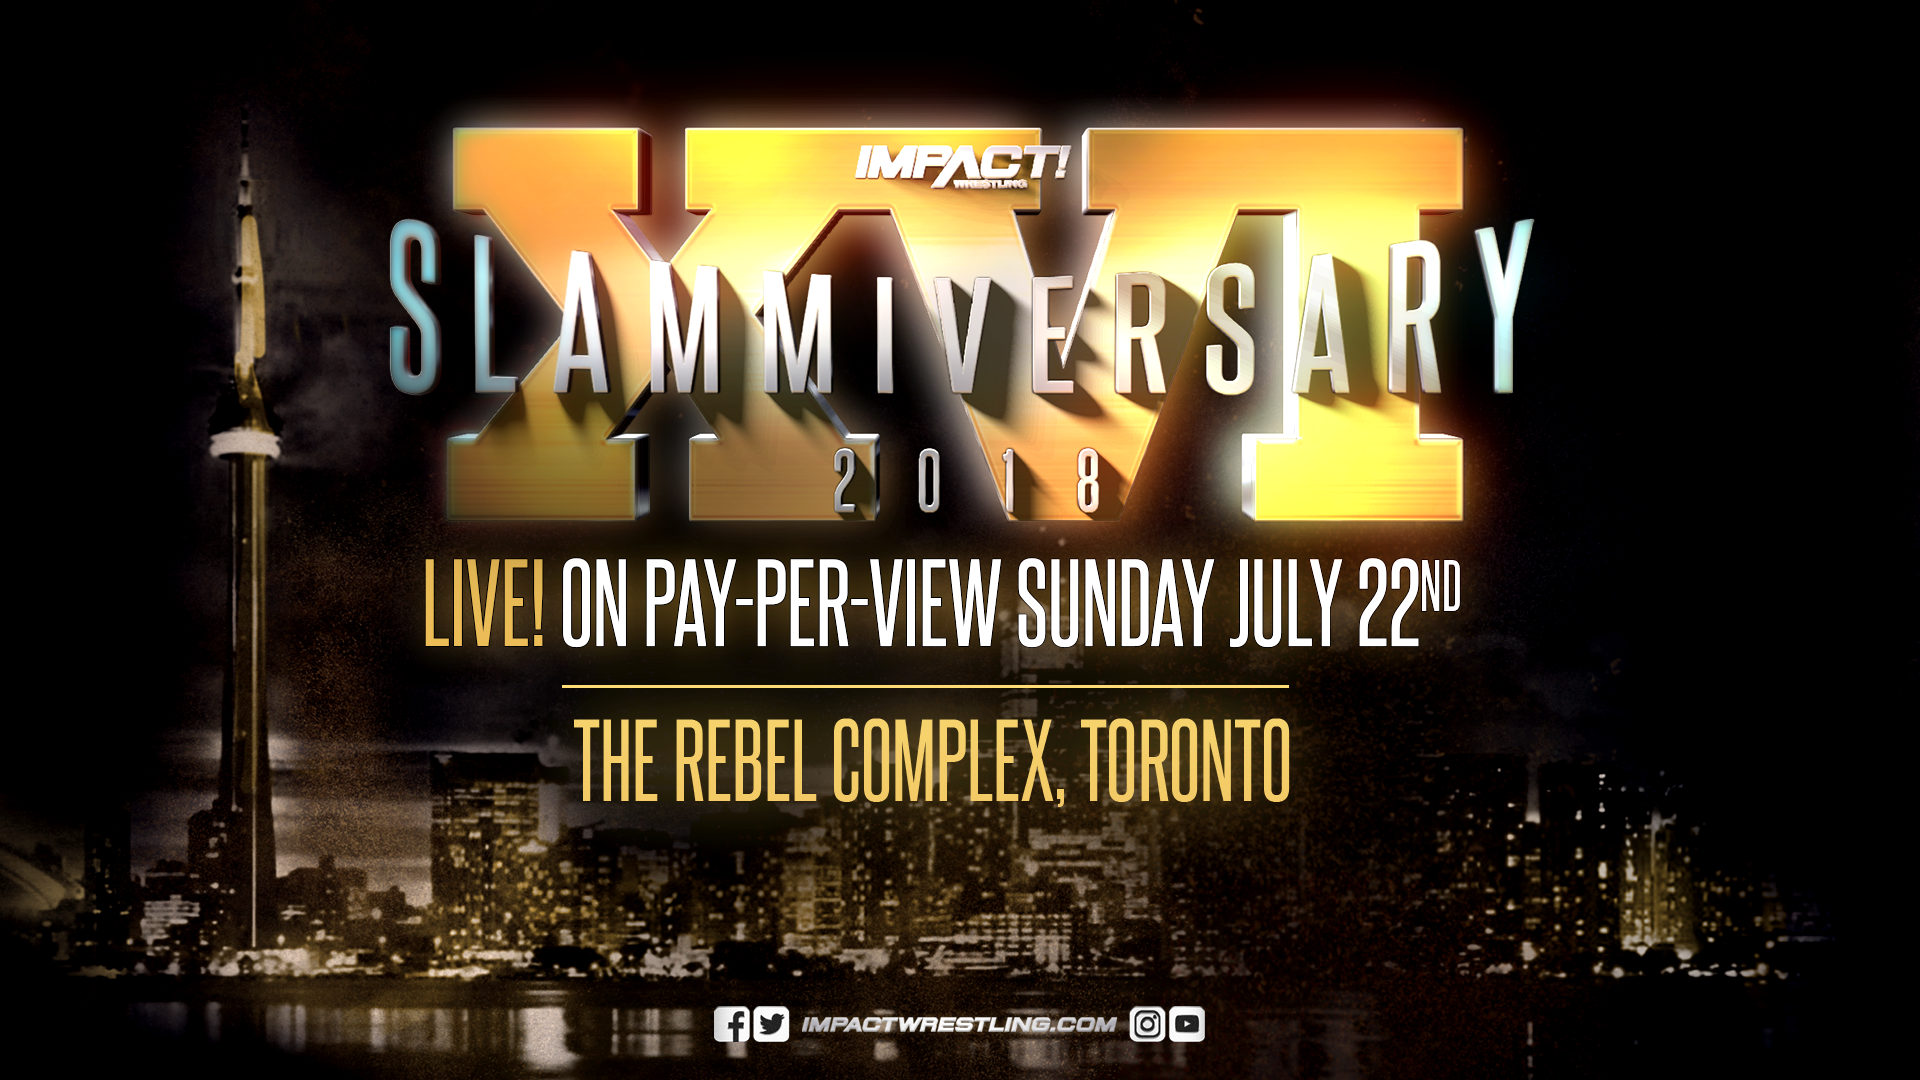 Preview The Fallout From Impact Wrestling’s Stellar Slammiversary XVI